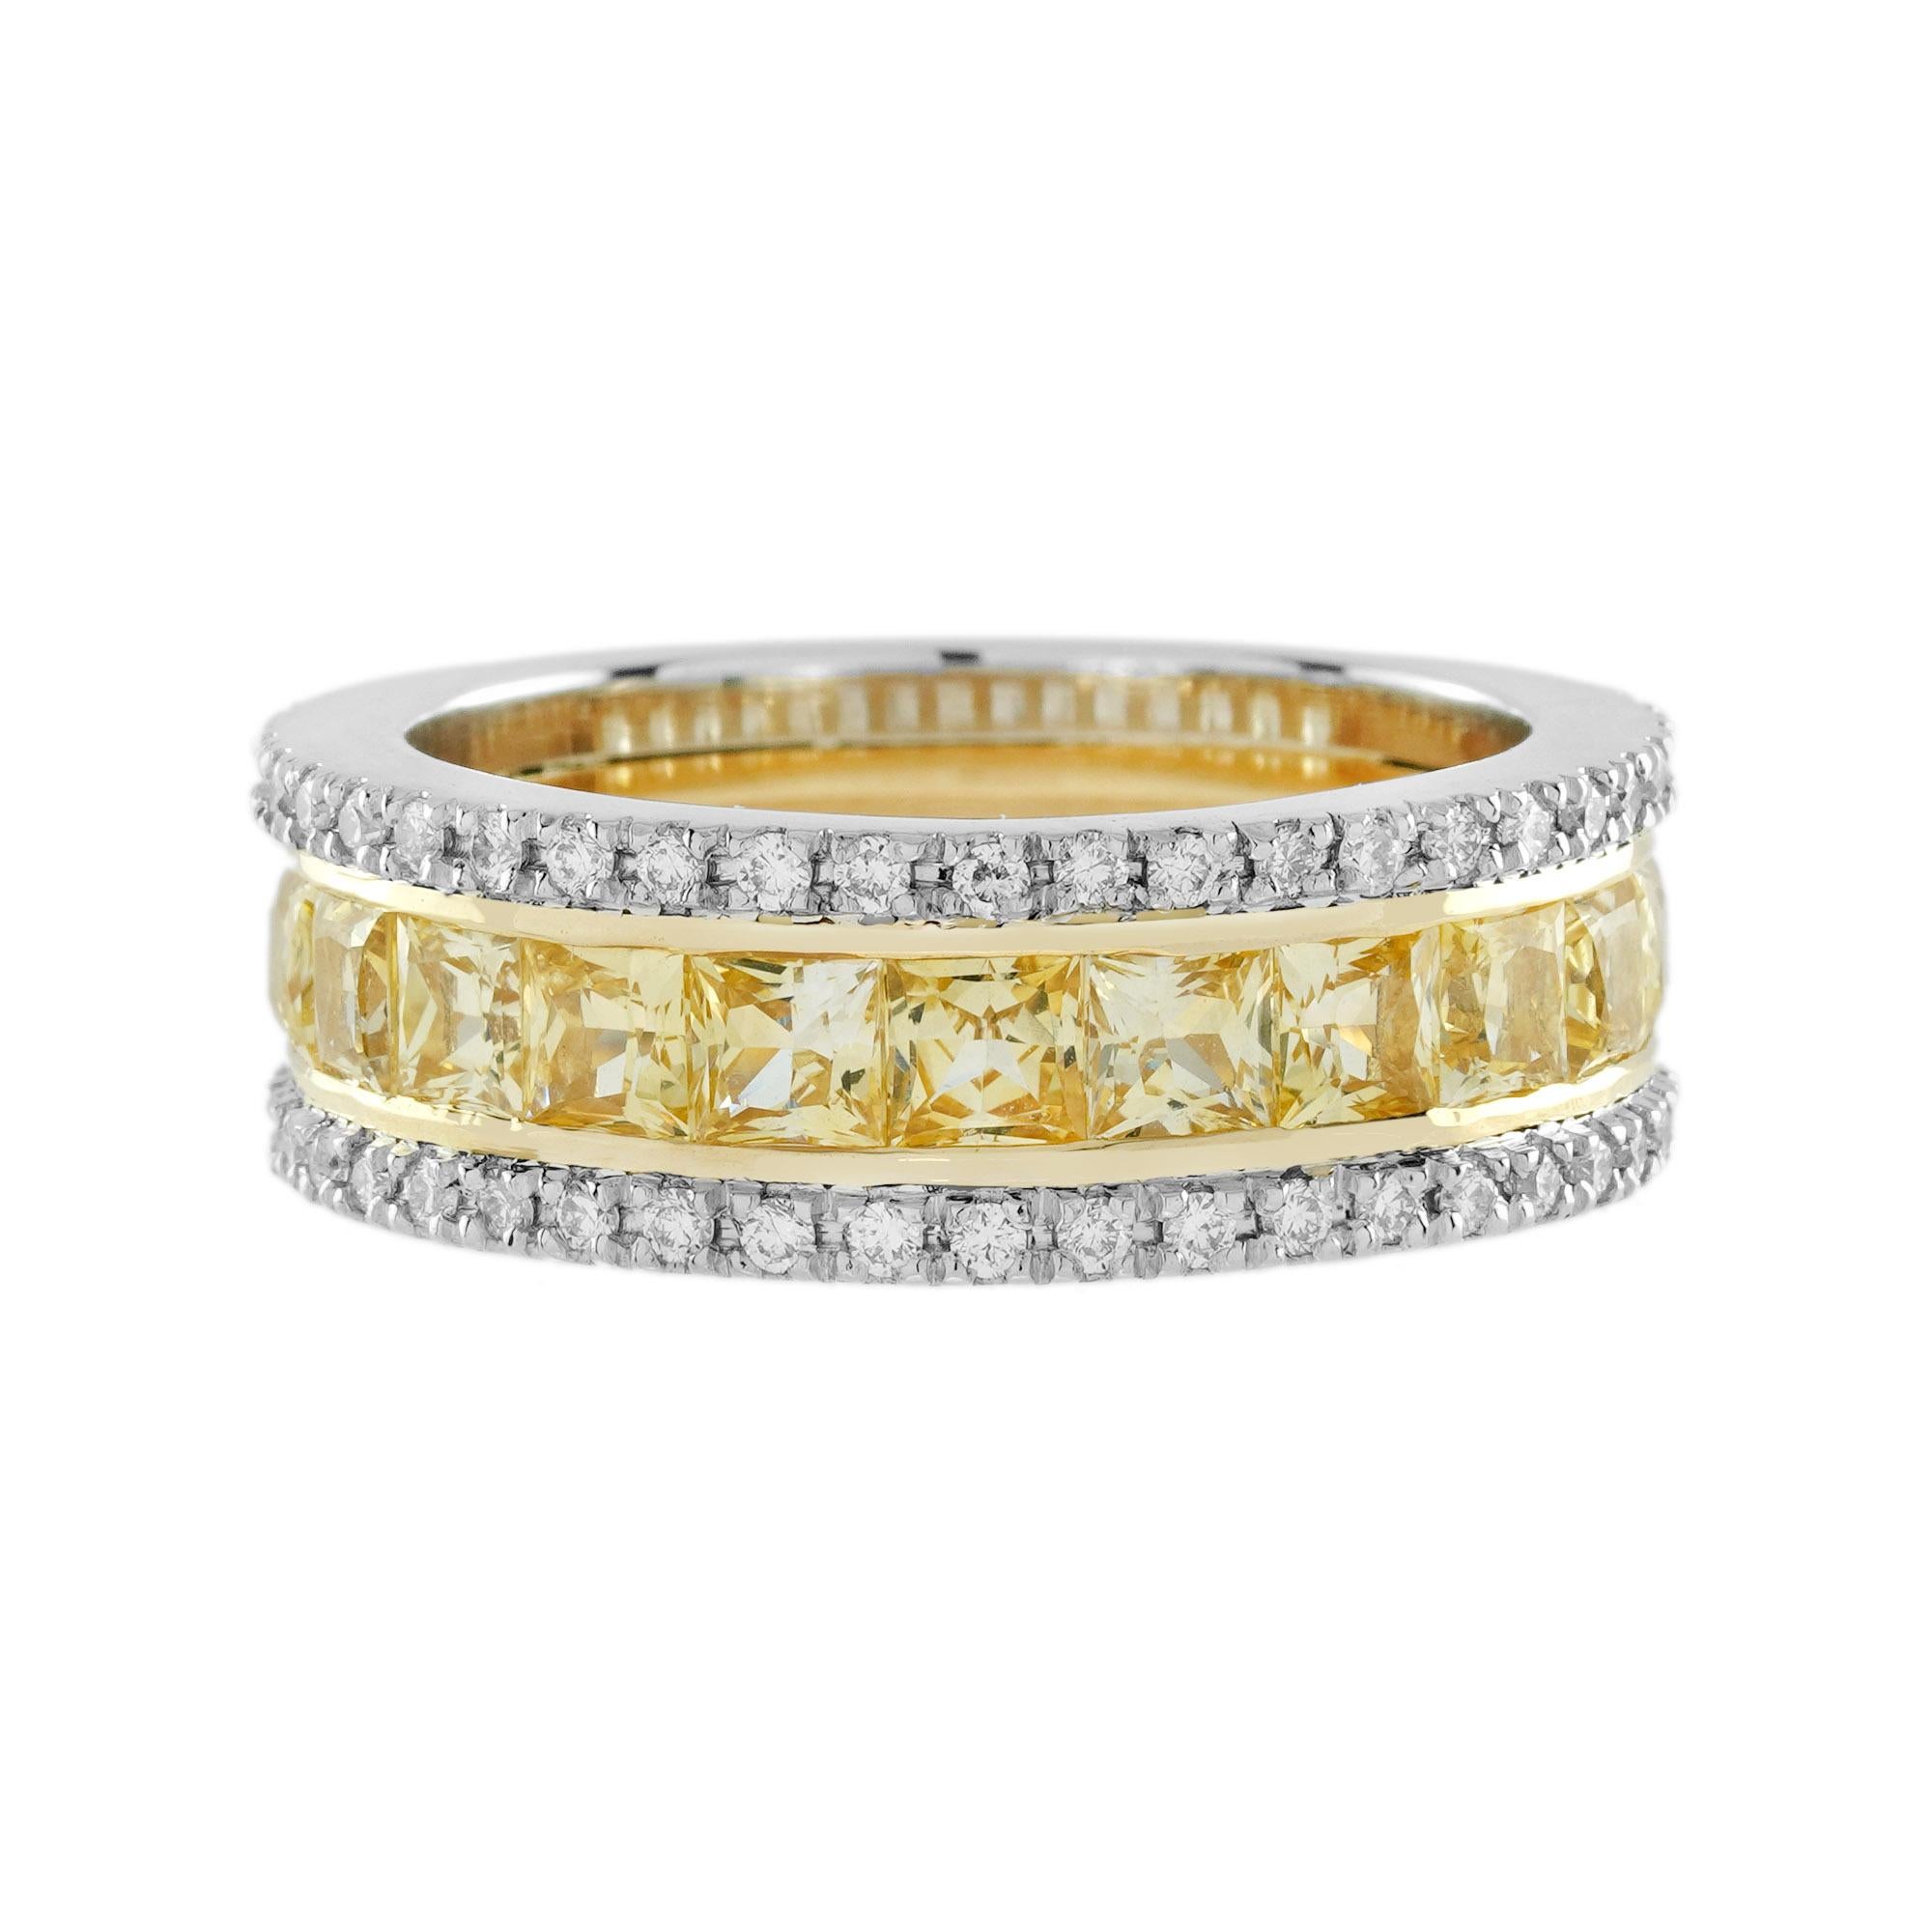 Art Deco 3 Ct. Yellow Sapphire and Diamond Classic Half Eternity Band Ring in 18K Gold For Sale